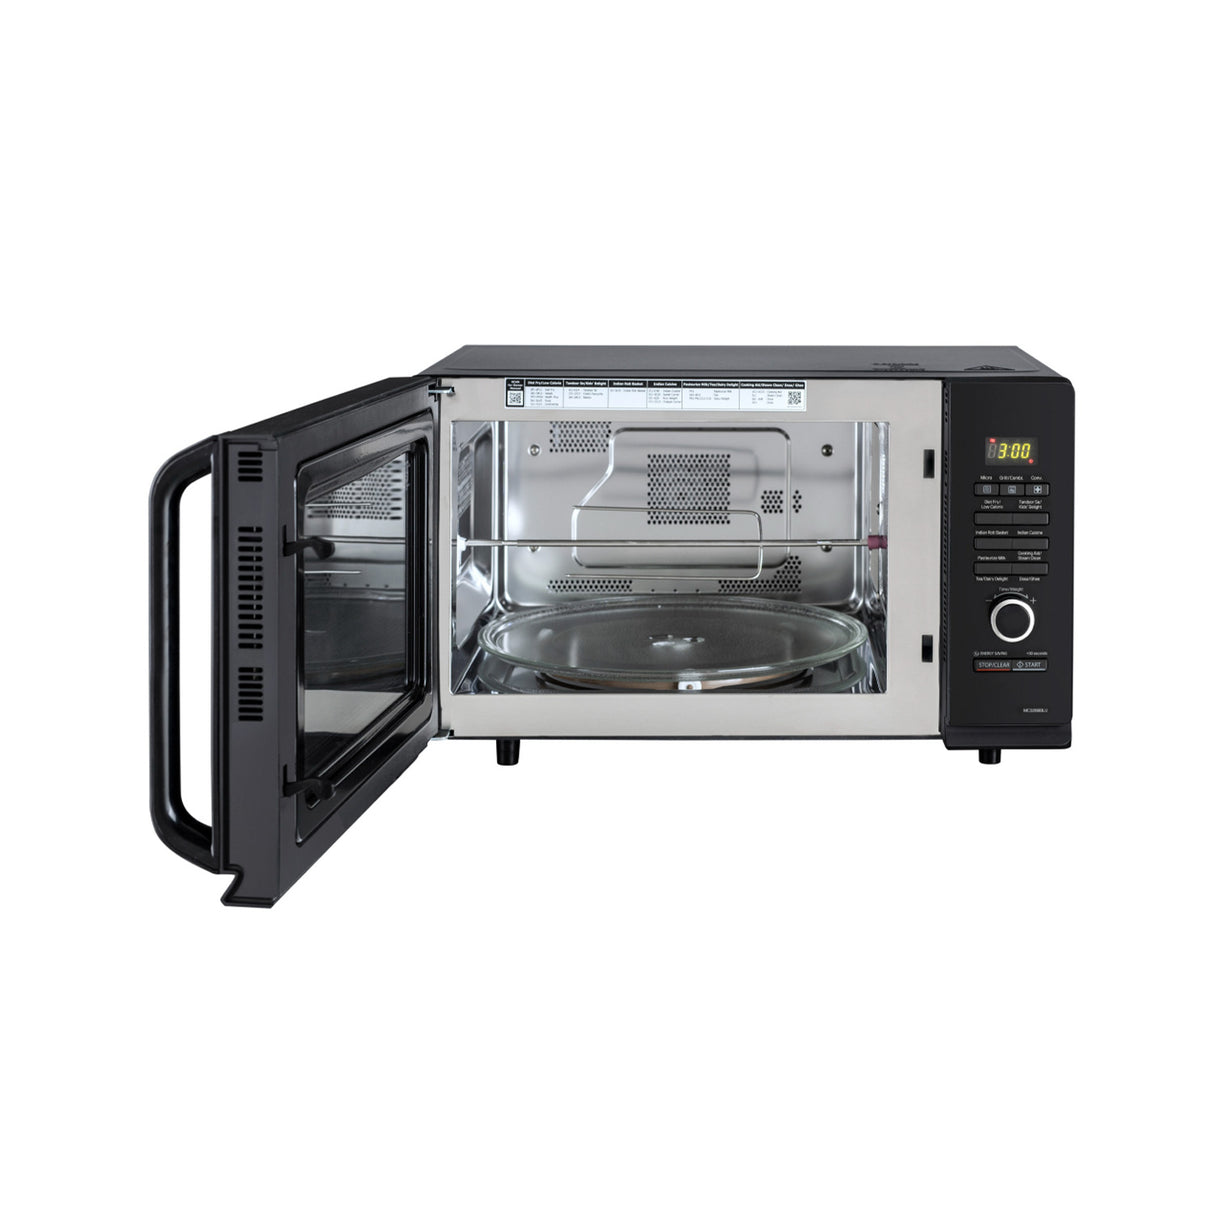 LG 32L Convection Microwave with Motorized Rotisserie  MW MC3286BLU